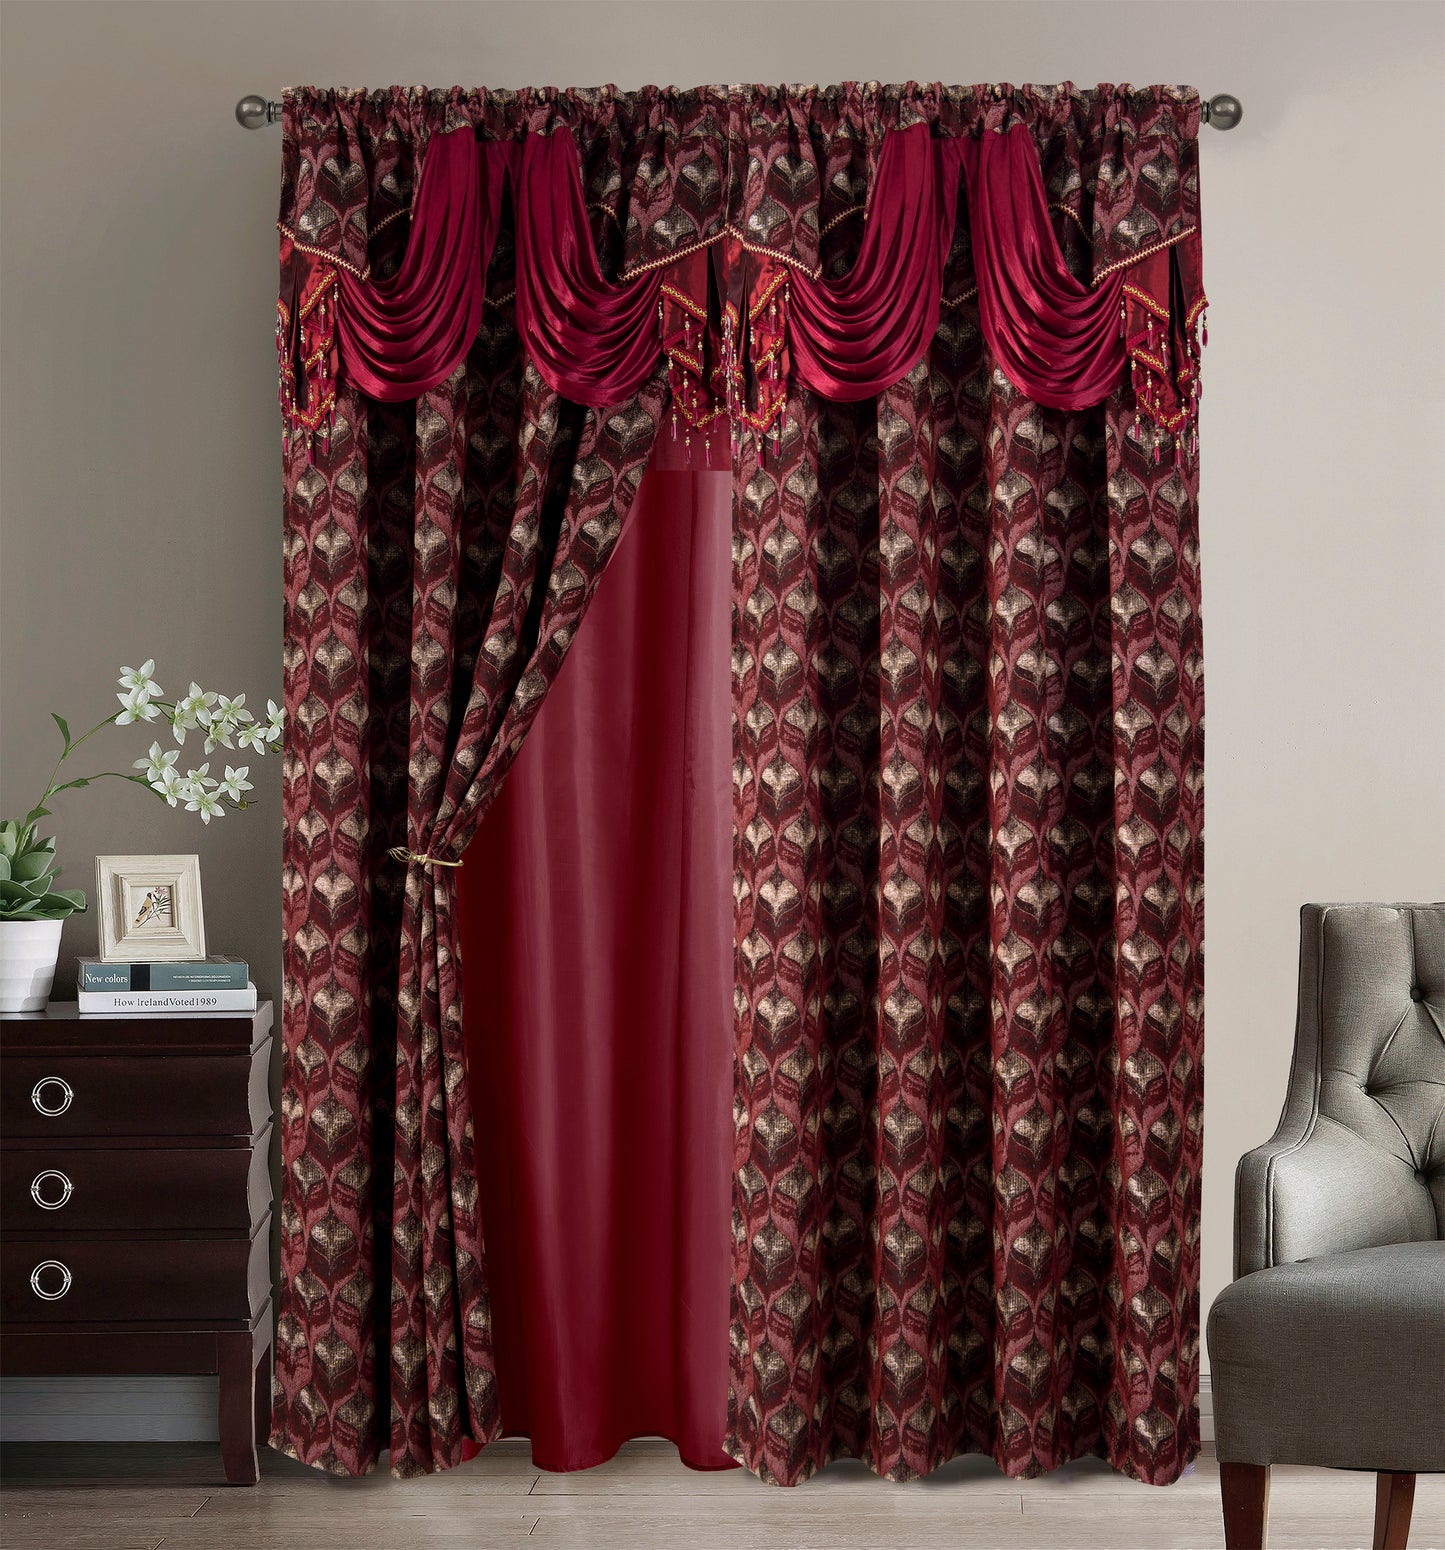 2PC CURTAIN SET W/ ATTACHED VALANCE & BACKING - Gloria